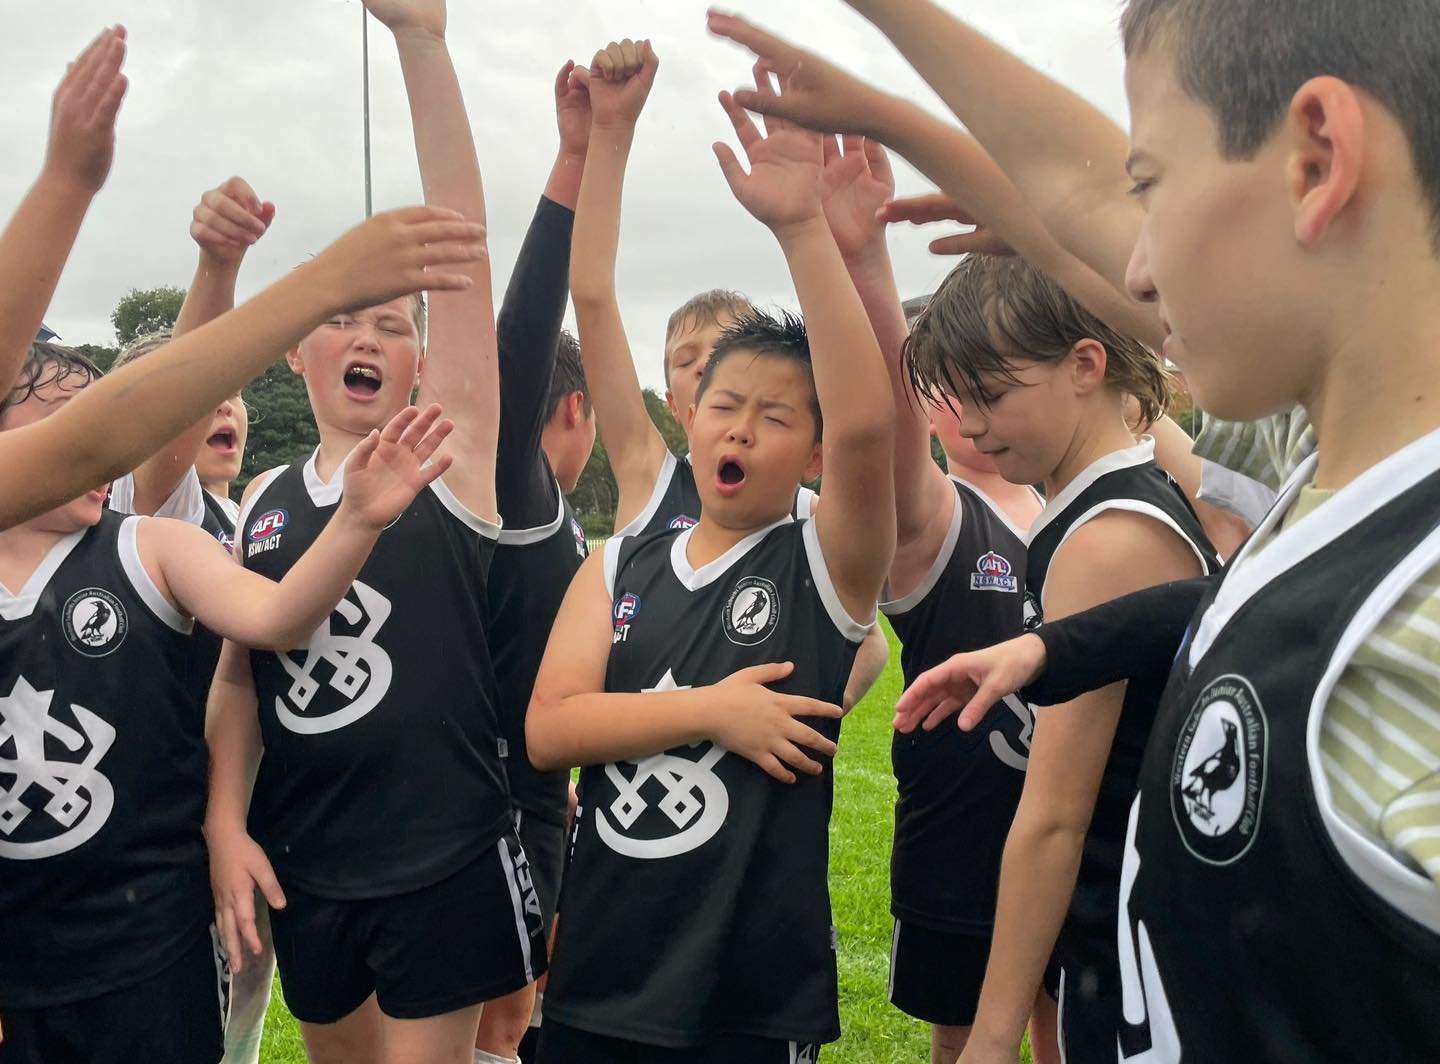 Muddy fun and a win for our U11 legends on Saturday at ADO supported in numbers by some gutsy U10s playing up. 

This team is light in numbers but have a never give up attitude that is being rewarded as the season progresses. 

Know any budding AFL s